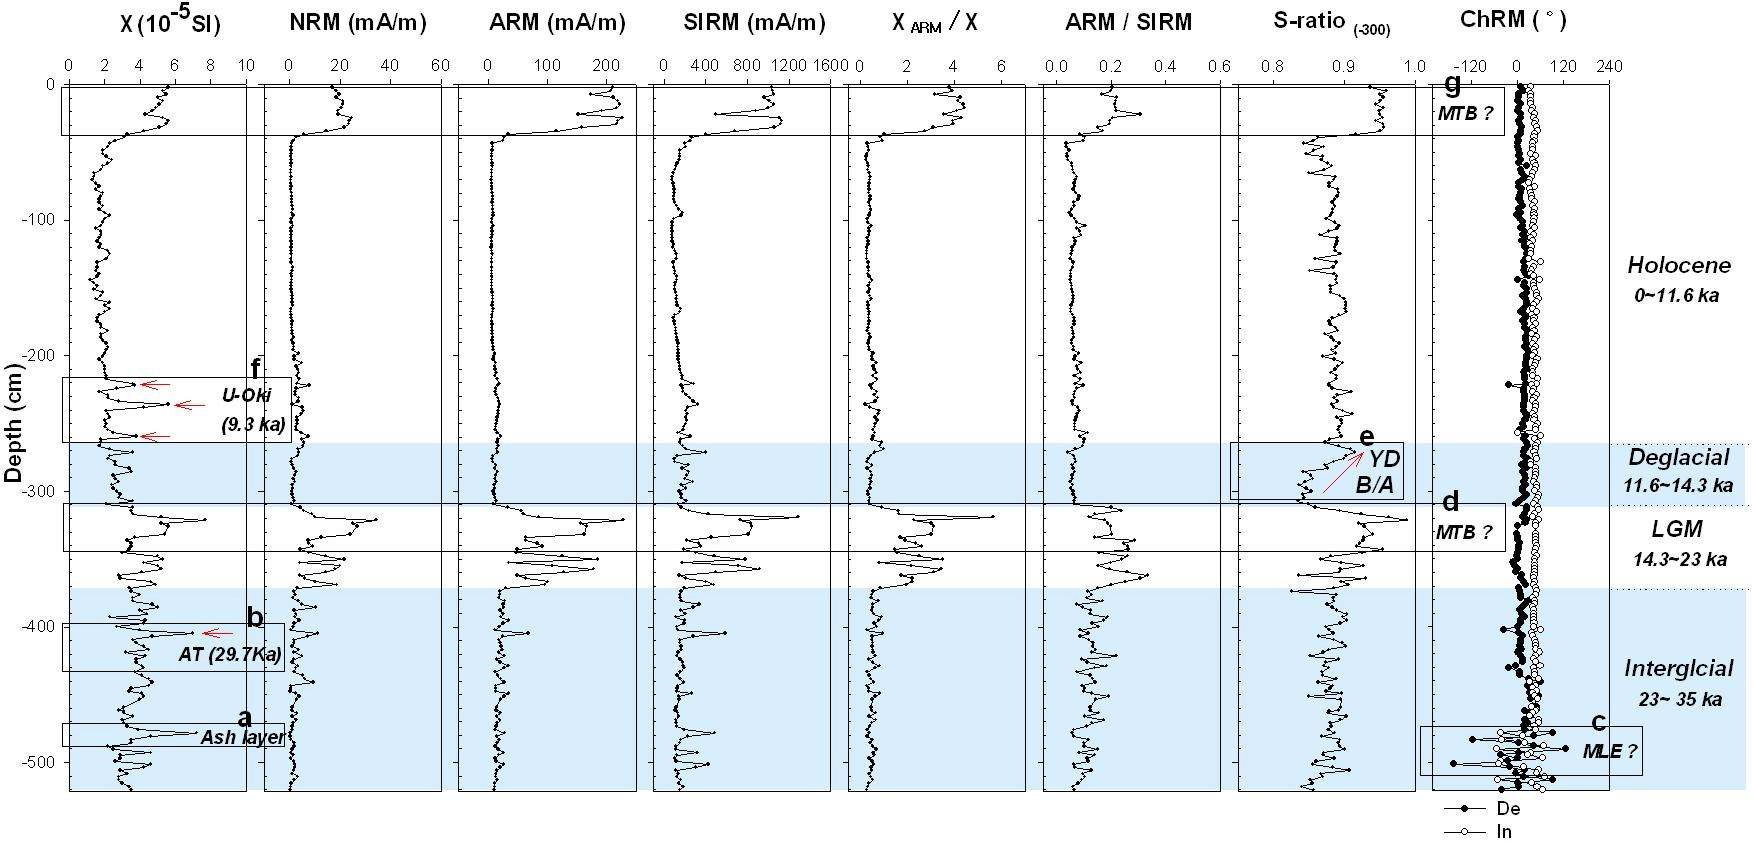 Fig. 2. Results of down core variations of rockmagnetic parameters (χ, NRM, ARM and SIRM), ratiosof rock magnetic parameters (χARM/χ, ARM/SIRM,SIRM/χ) and ChRM and ages for a core of site 09-8.